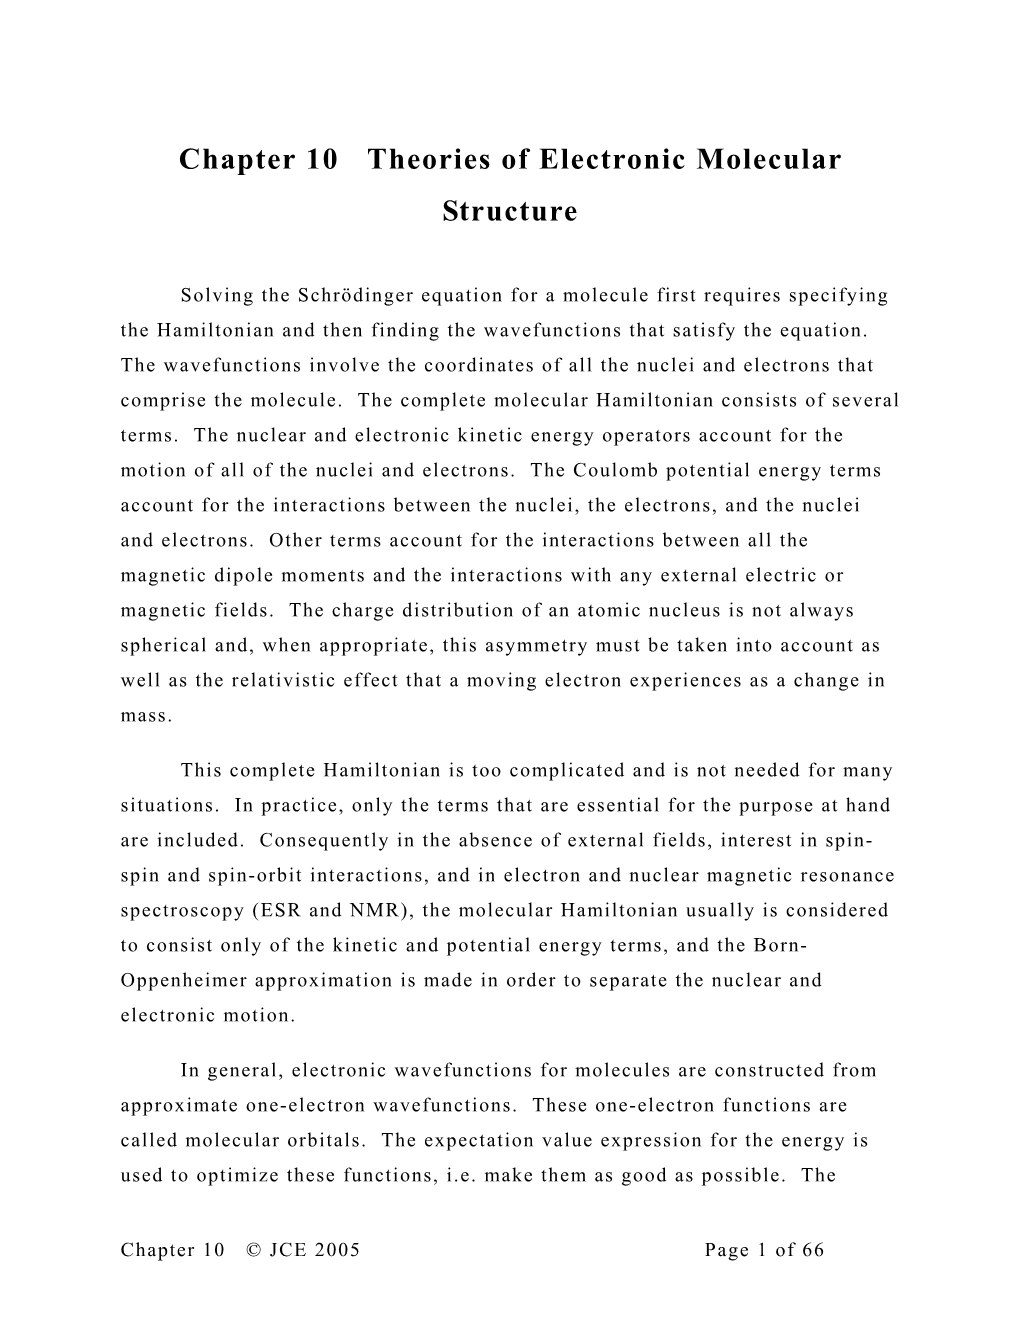 Chapter 10 Theories of Electronic Molecular Structure